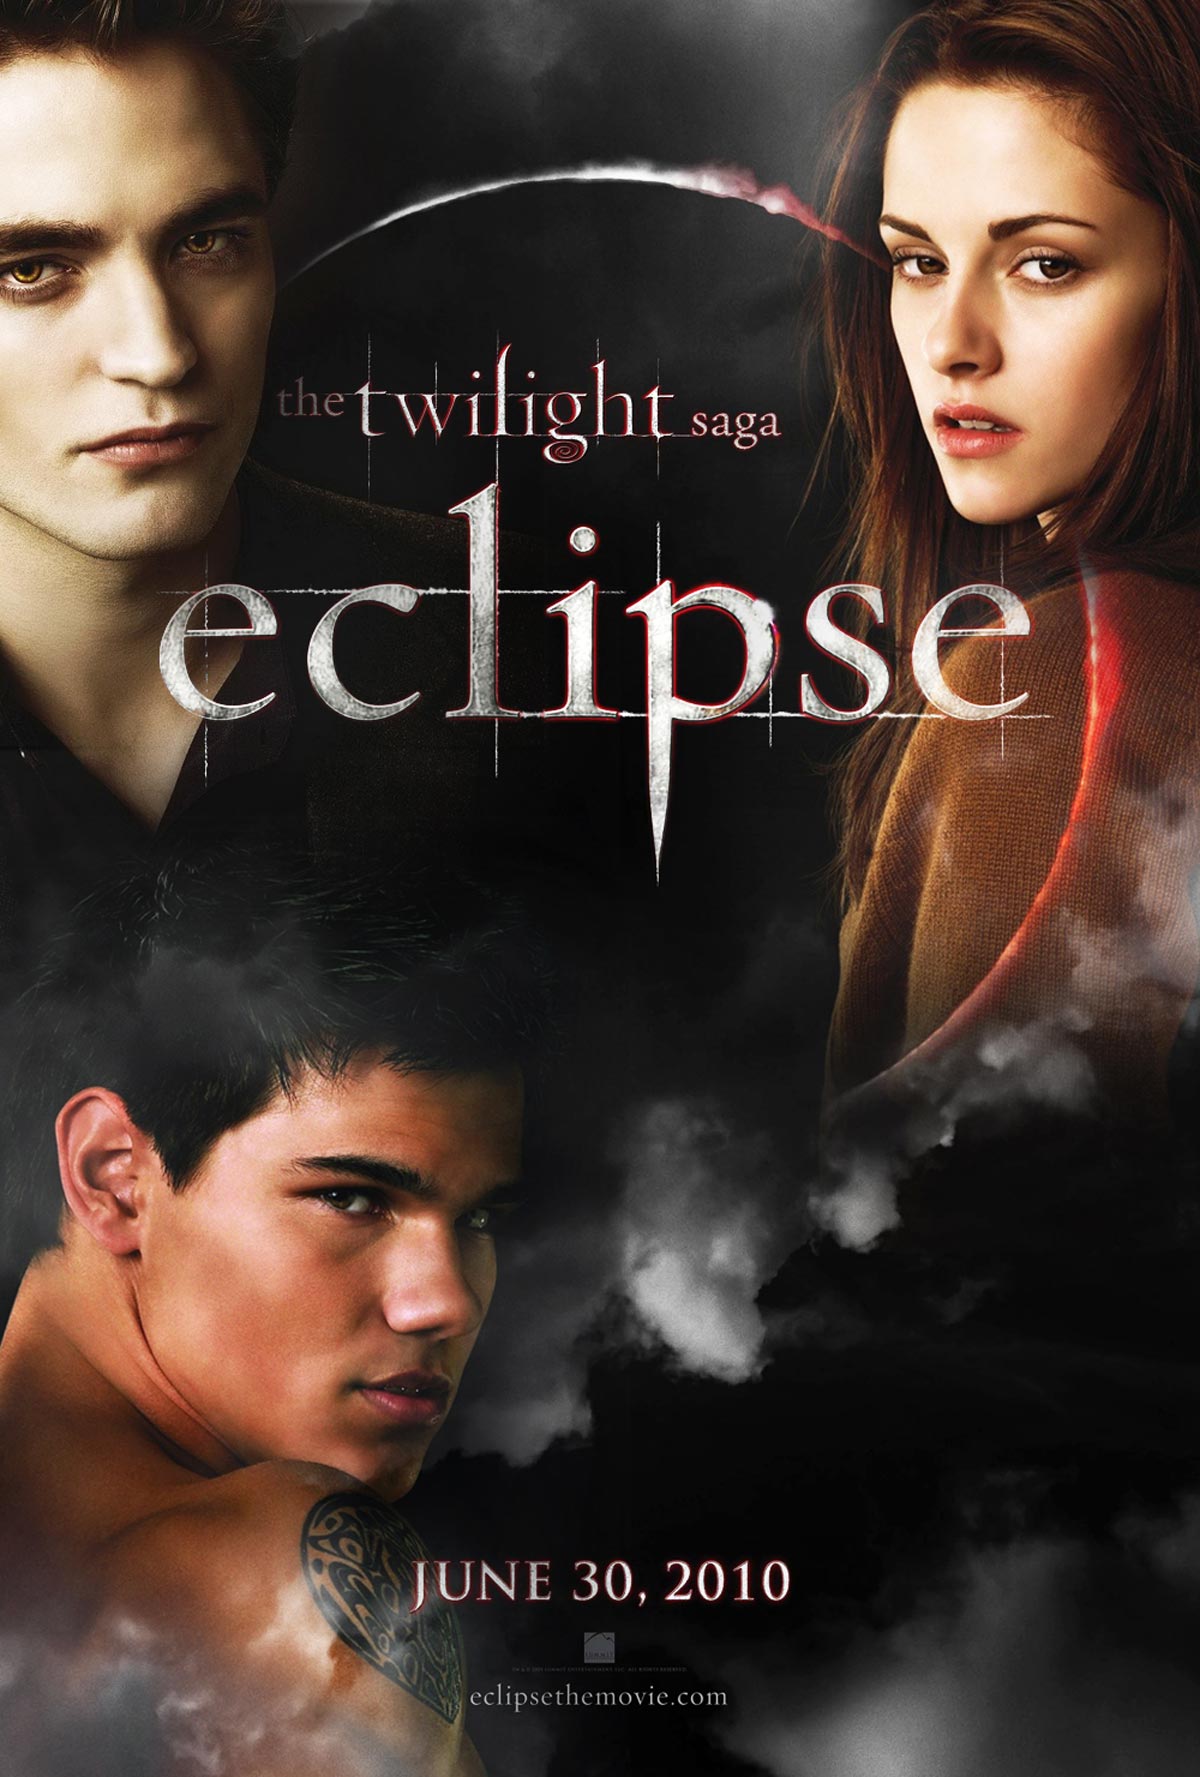 Movie Review The Twilight Saga Eclipse About Writing The Personal